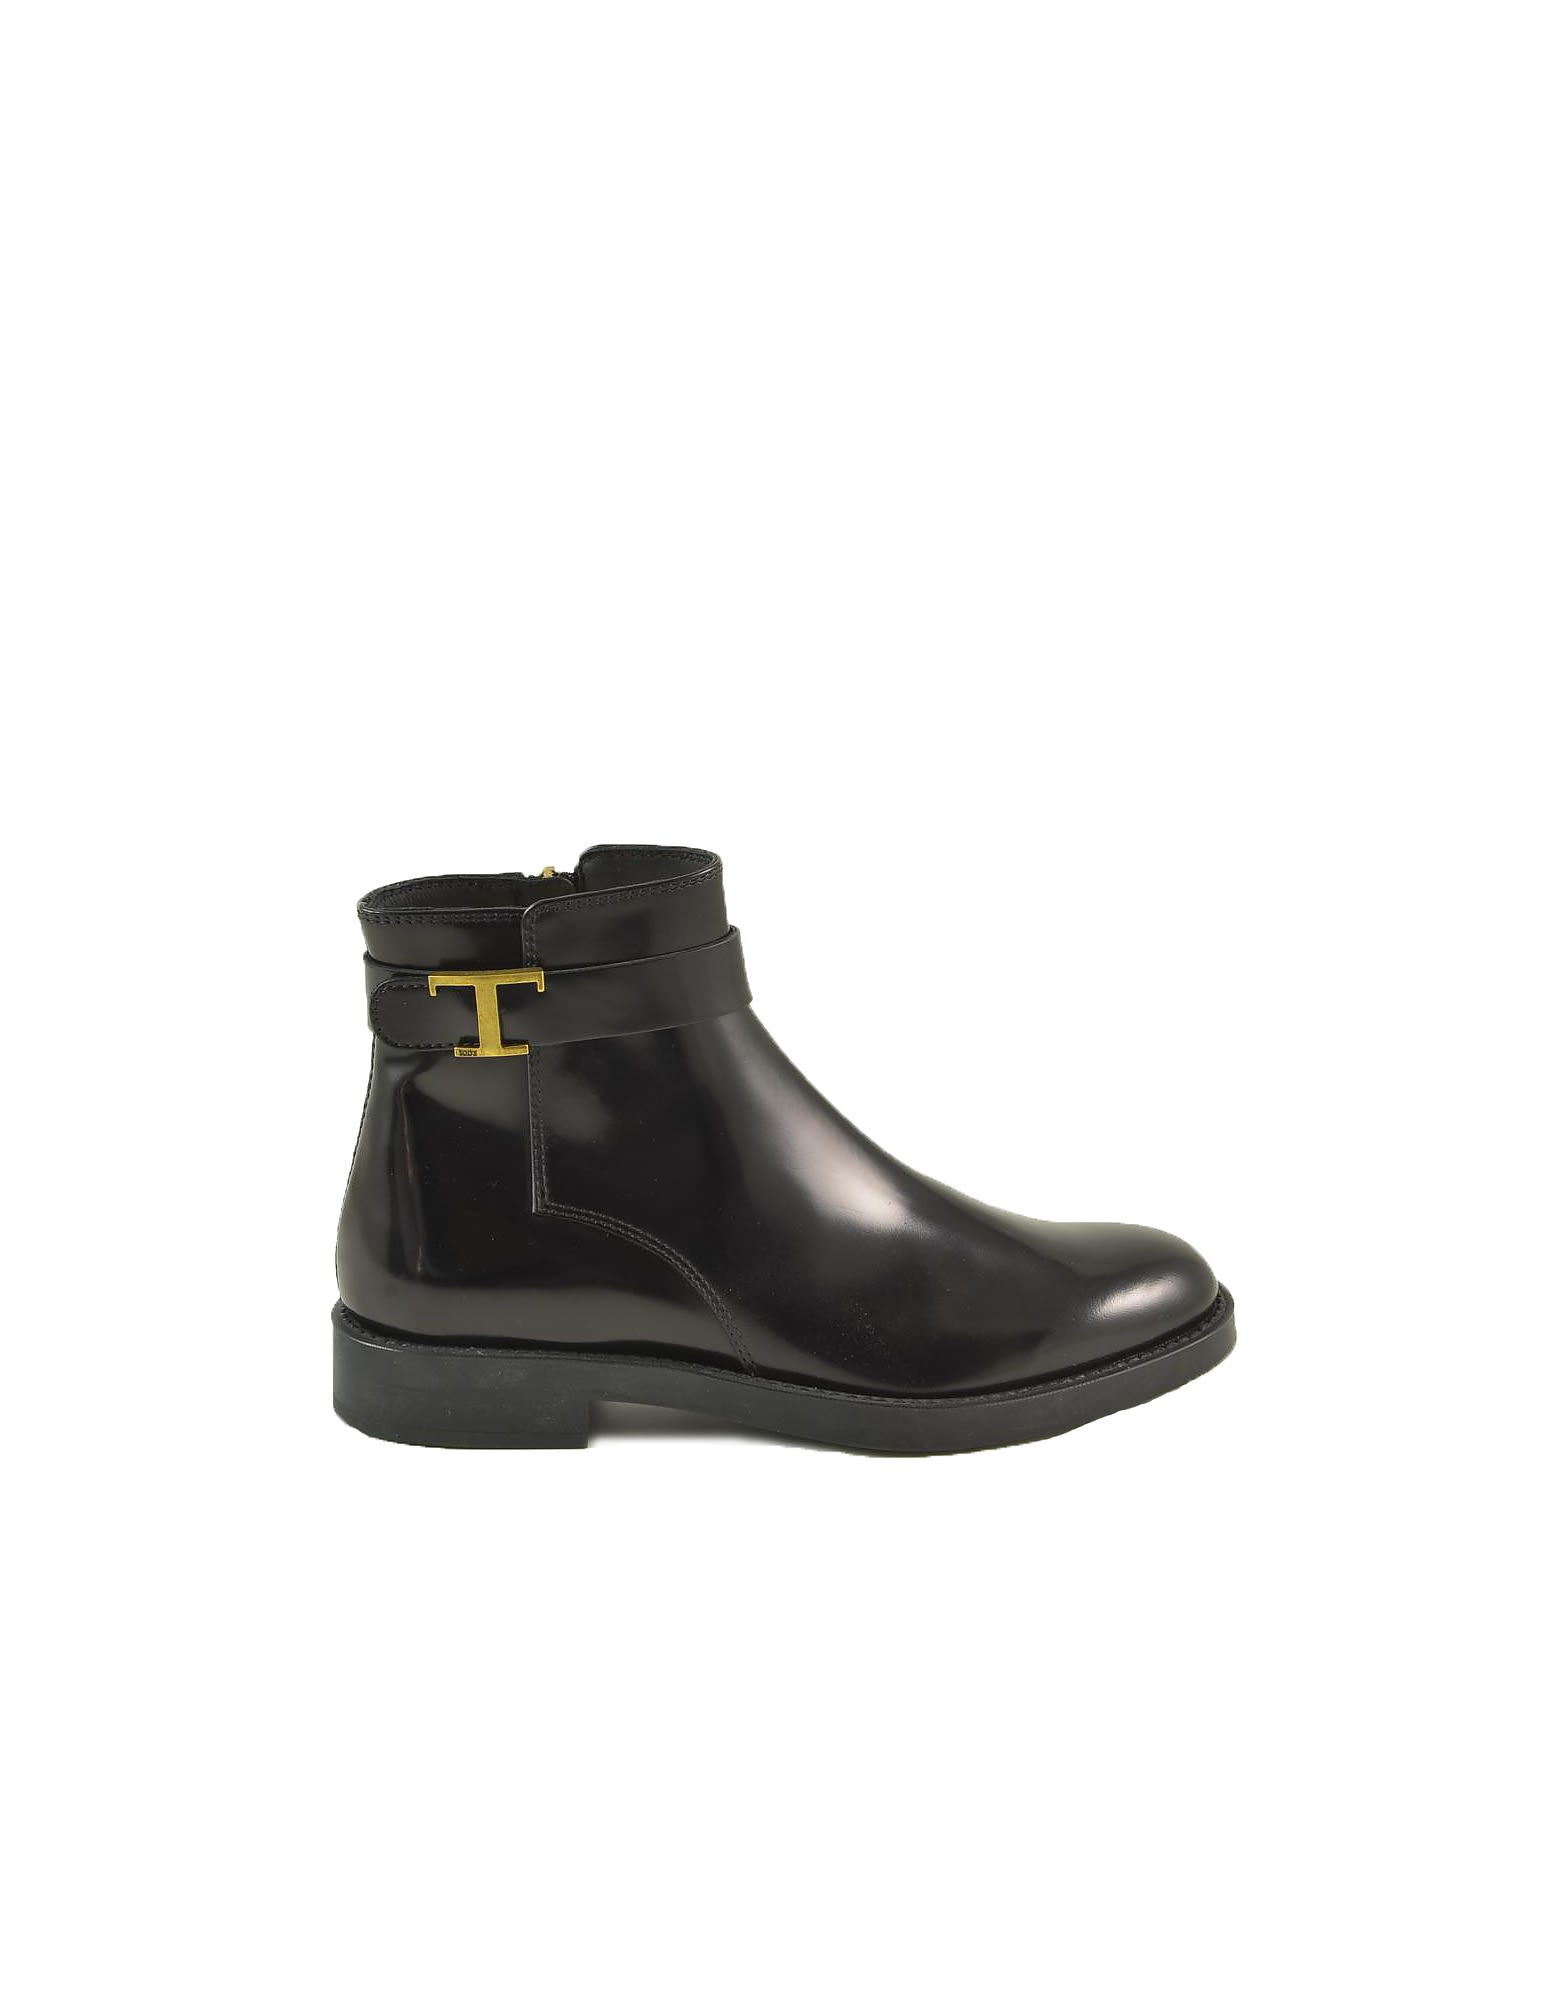 Tods Black Leather T Booties